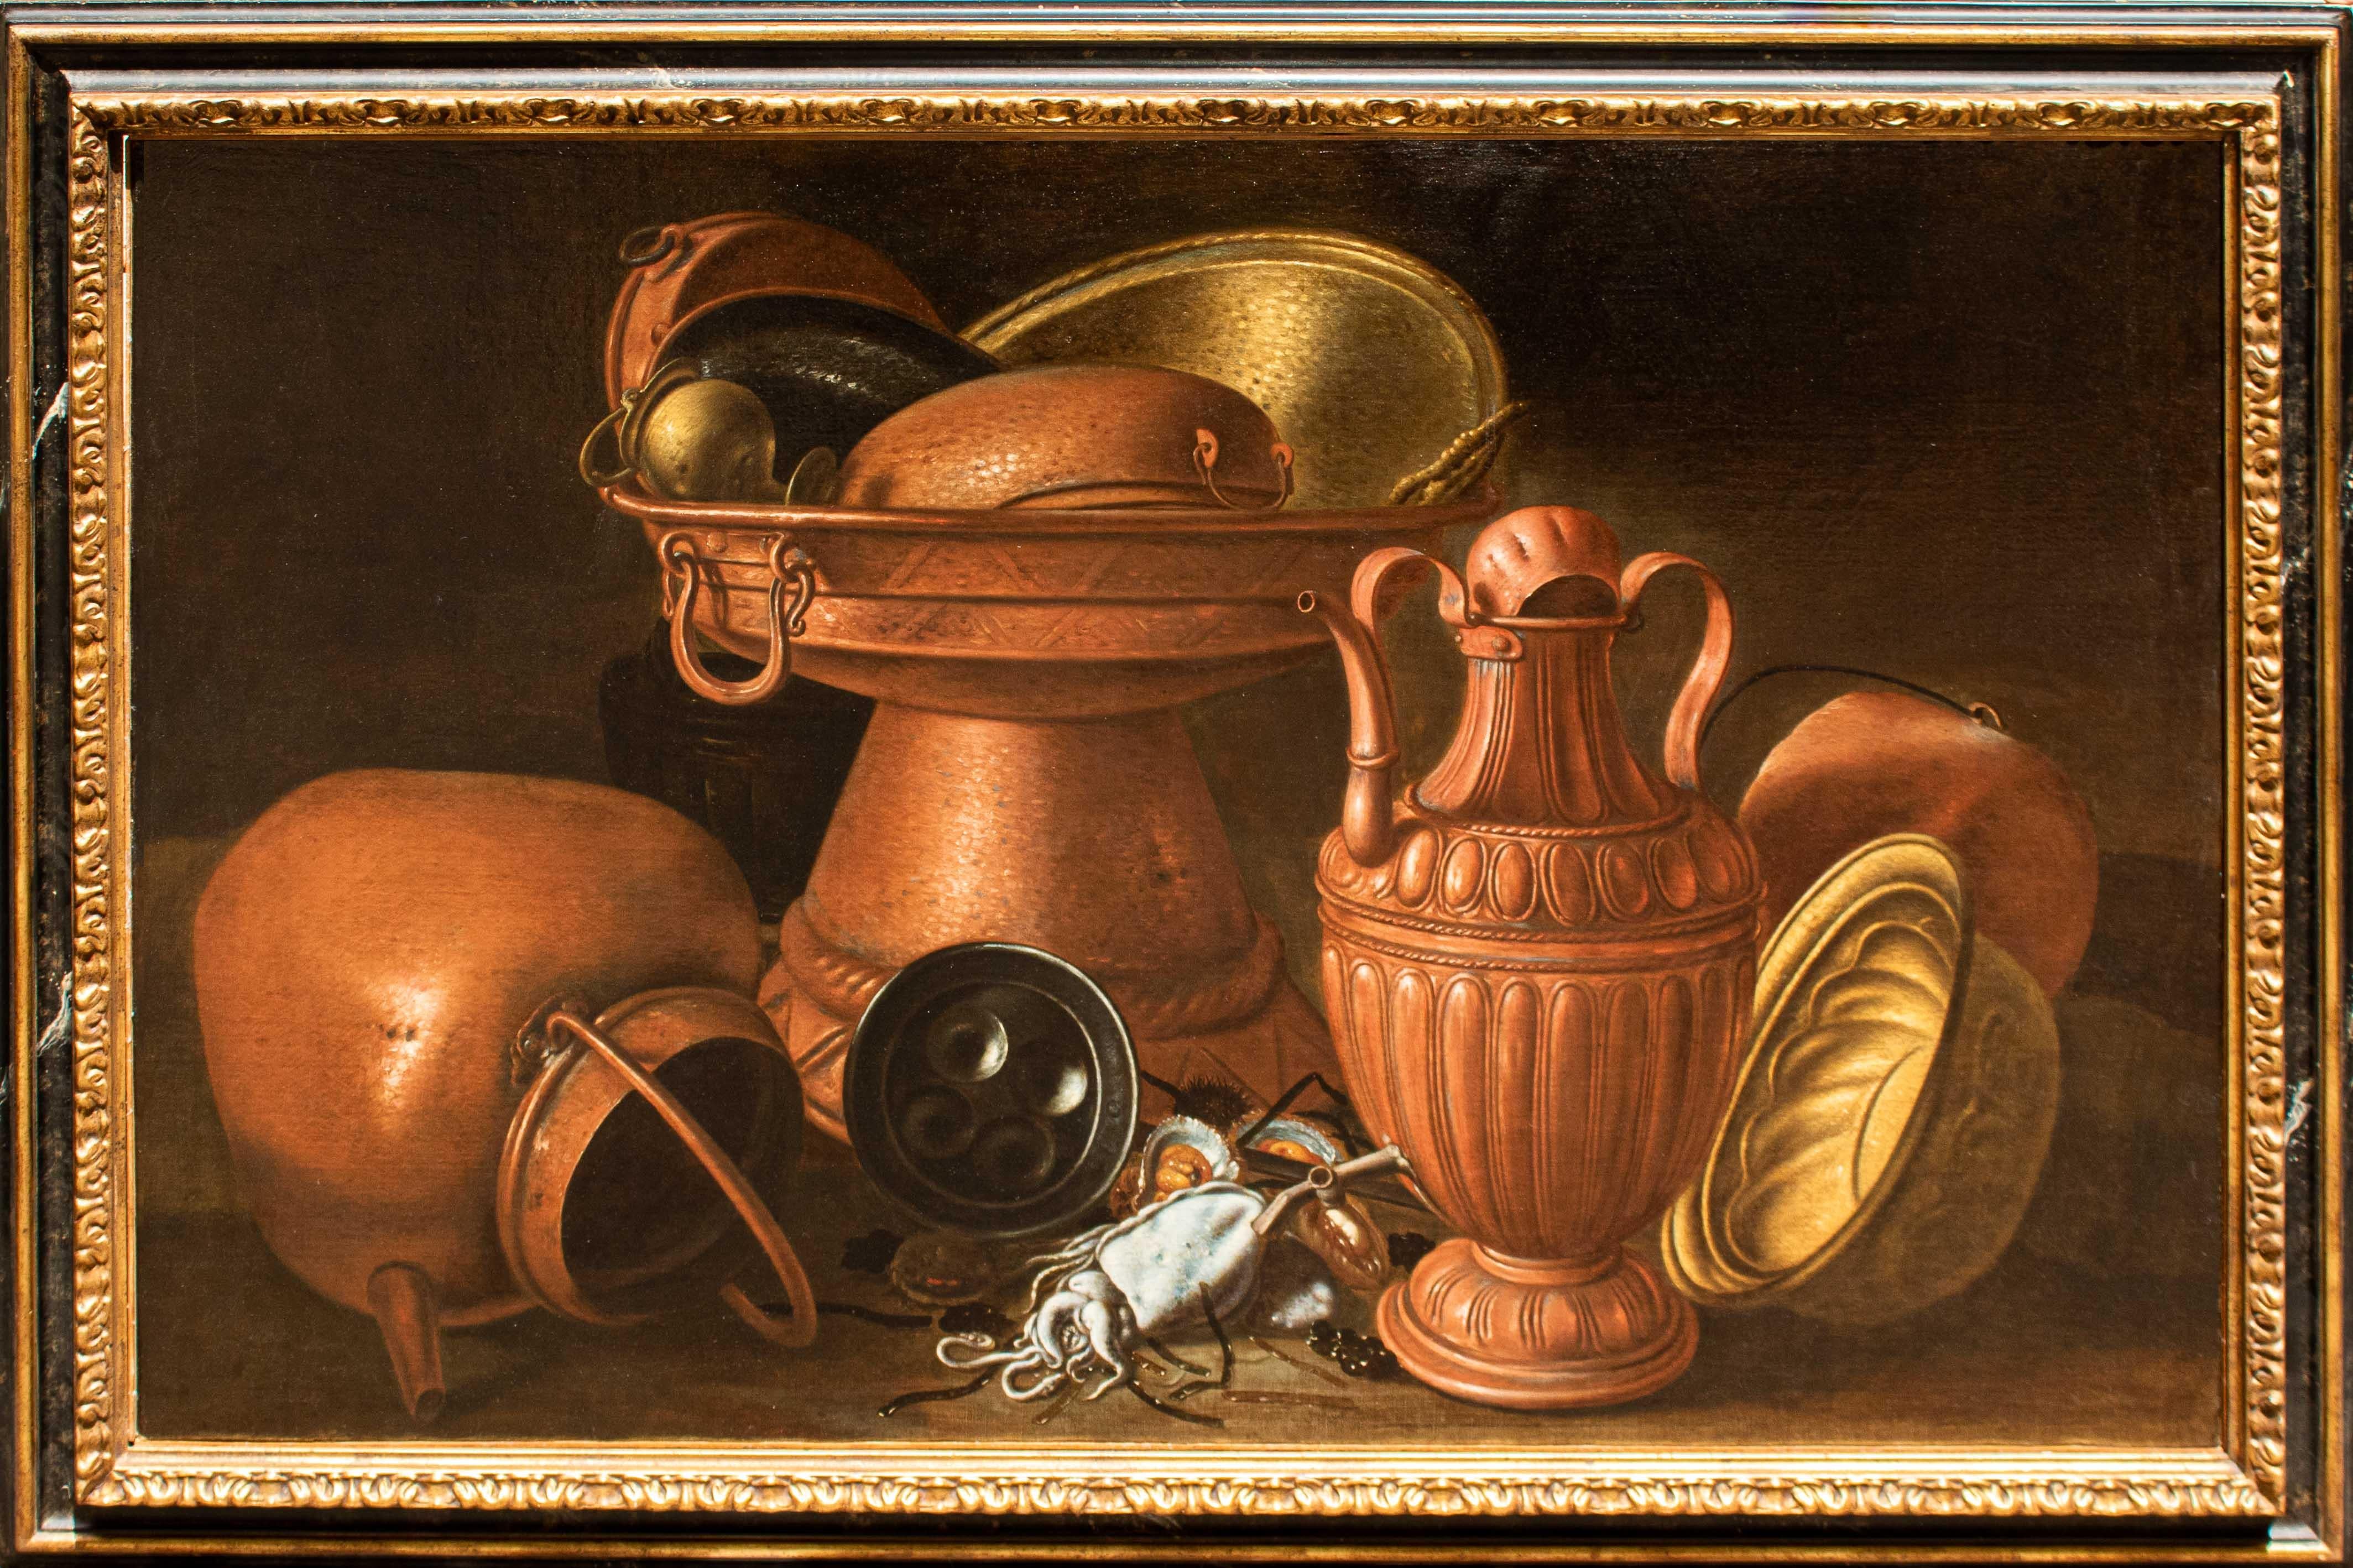 Joseph Ruoppolo (c. 1630 - 1710)

Still life with copper crockery, cuttlefish and oysters

Oil on canvas, 102 x 152 cm

Frame 122 x 172 cm

The absolute authorship of the present painting, also unsigned, to Giuseppe Ruoppolo, is to be found in the